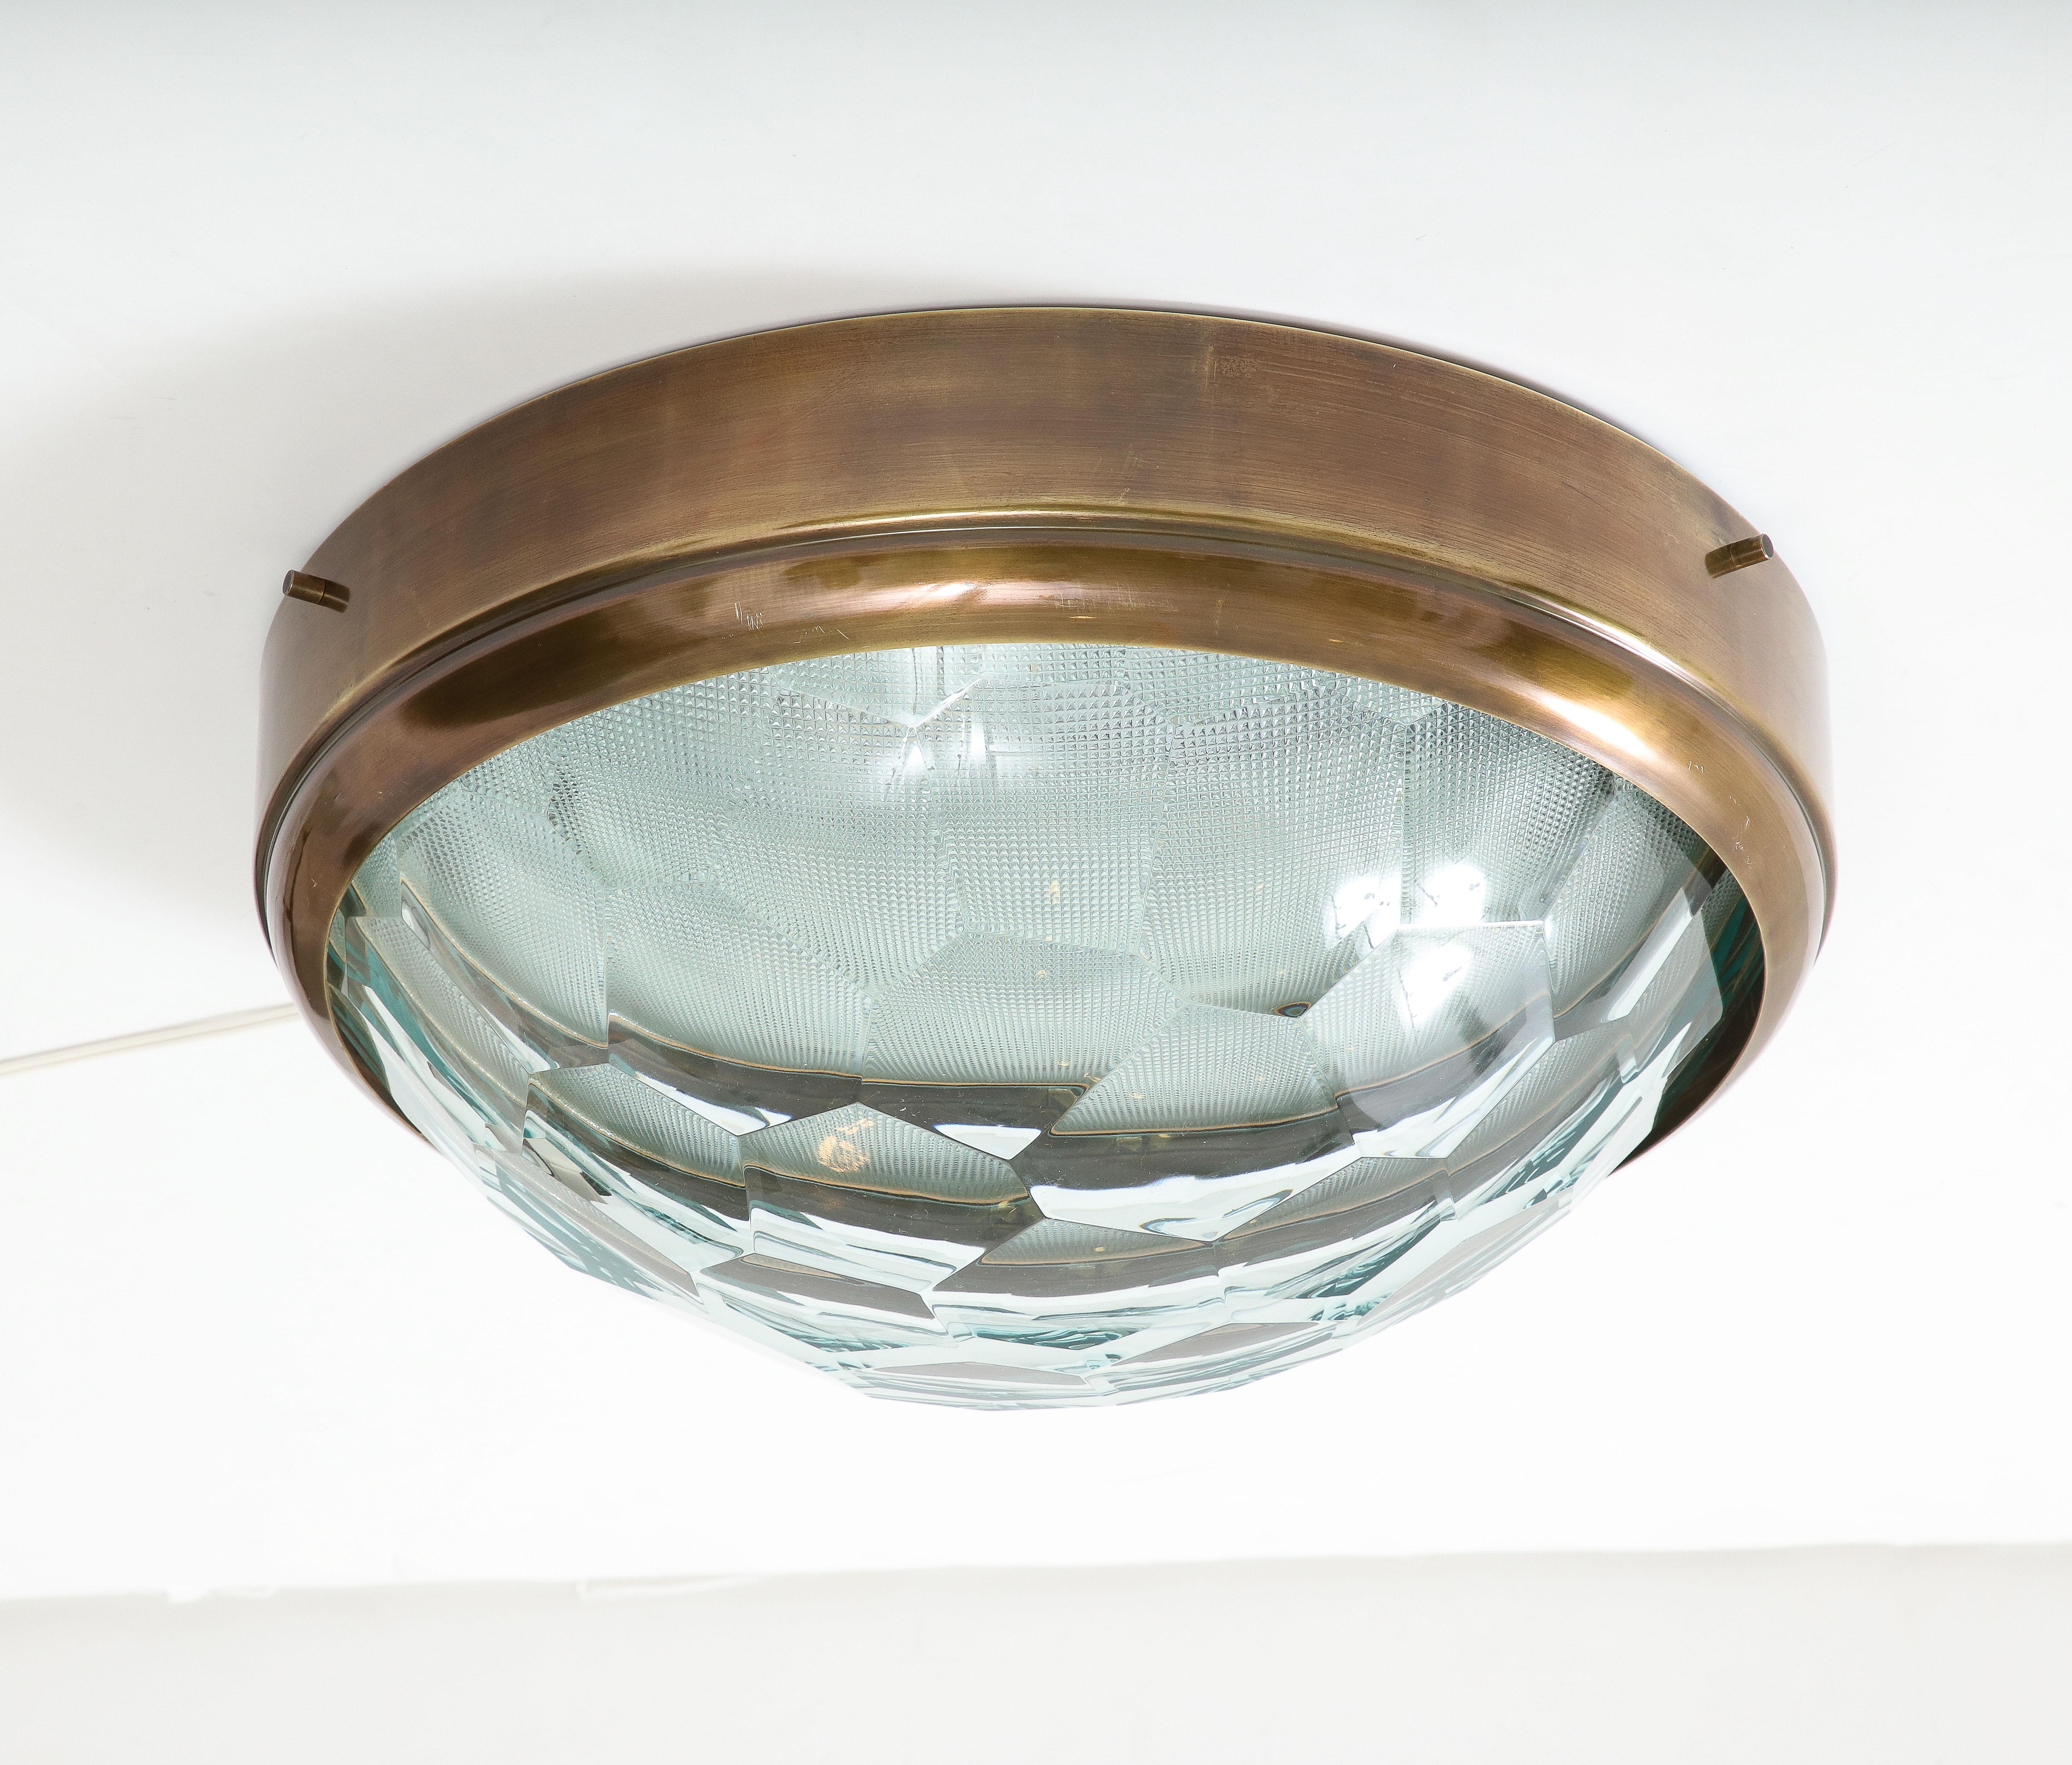 Large Faceted Glass Flush Mount Ceiling Light in Style of Fontana Arte, 1960s For Sale 1